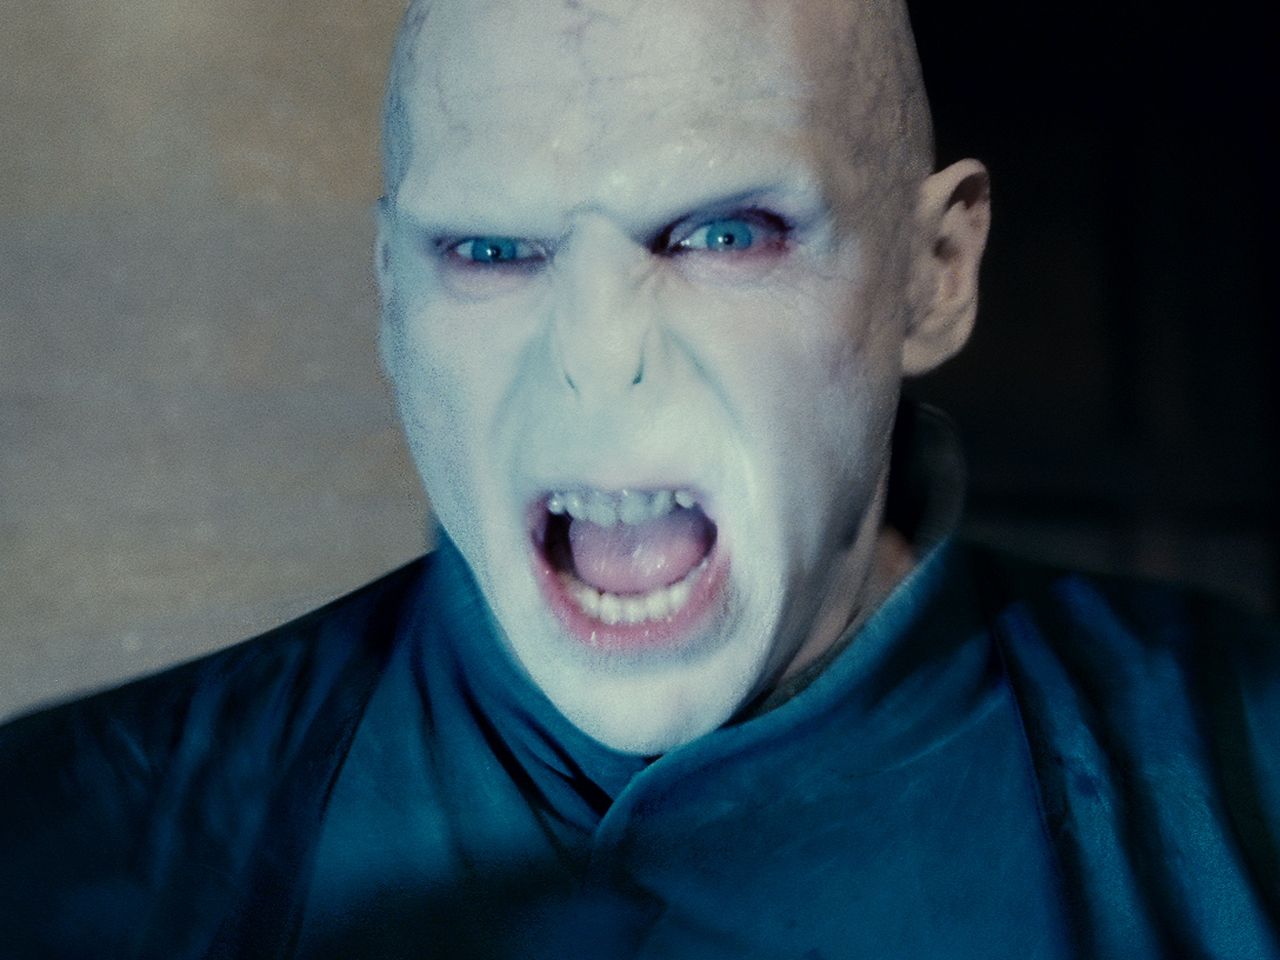 Lord Voldemort Porn - Study: Reading Harry Potter increases dislike for Donald ...